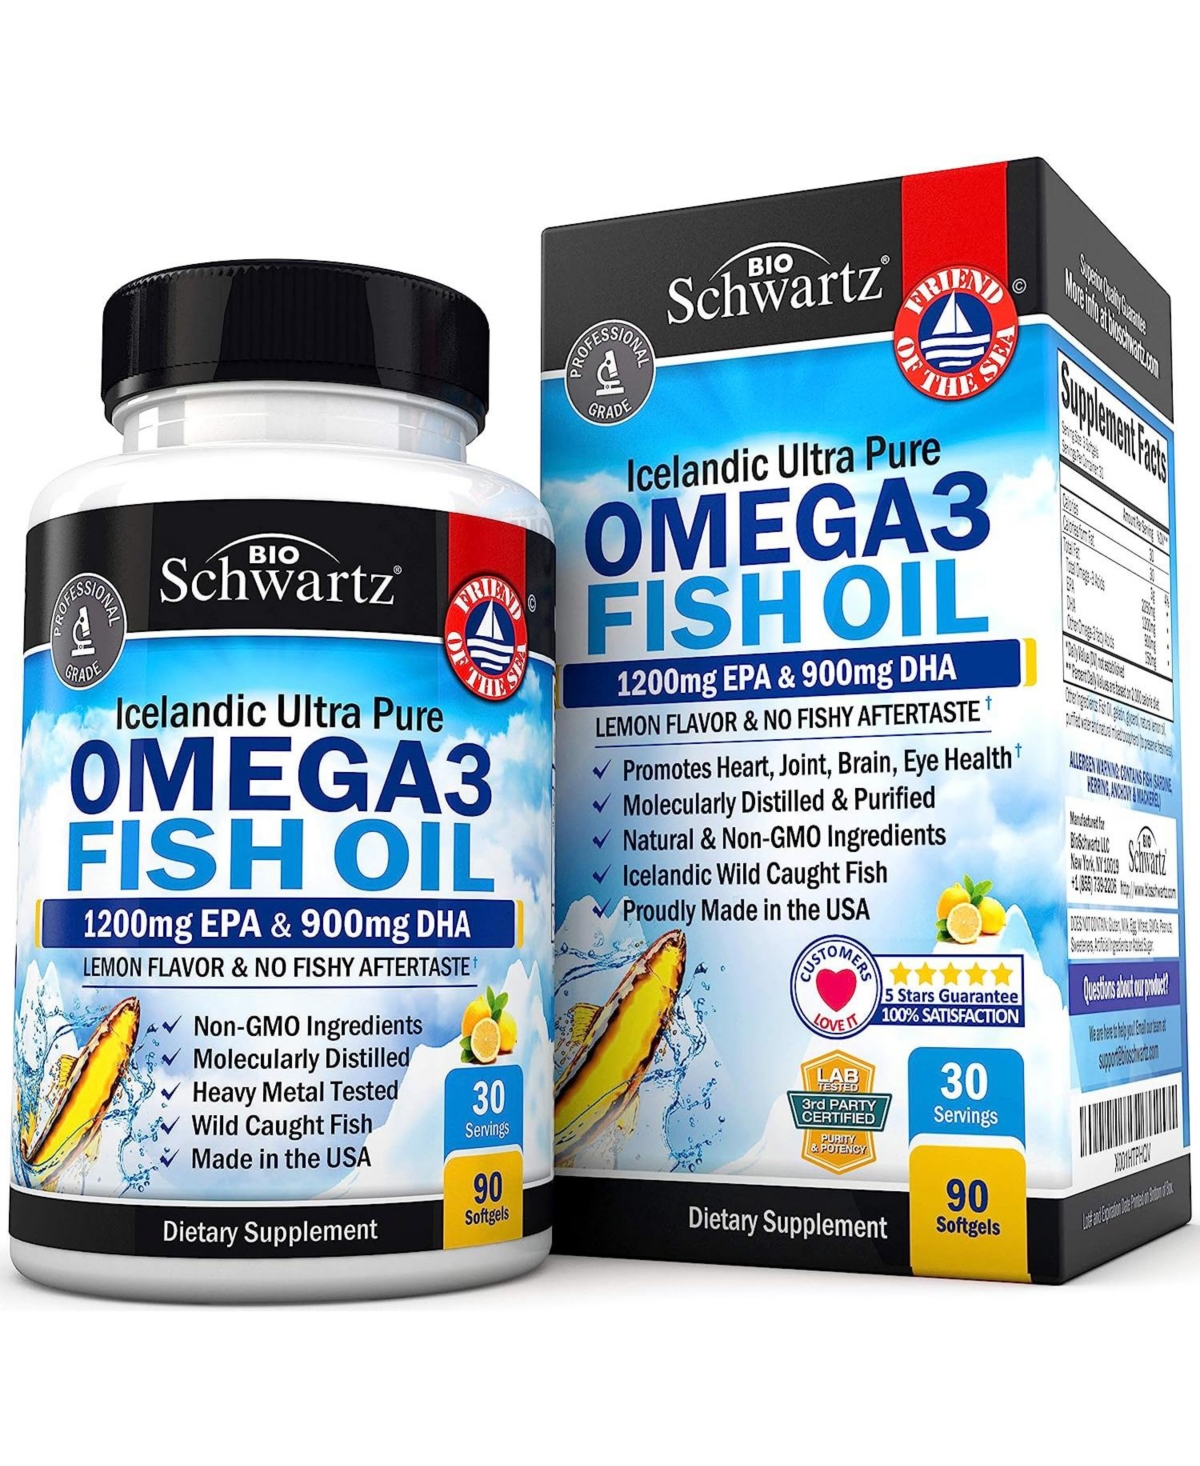 Omega 3 Fish Oil Supplement - 1200mg Epa and 900mg Dha Fatty Acid Per Serving from Wild Caught Fish - Supports Joint, Eyes, Brain & Skin H